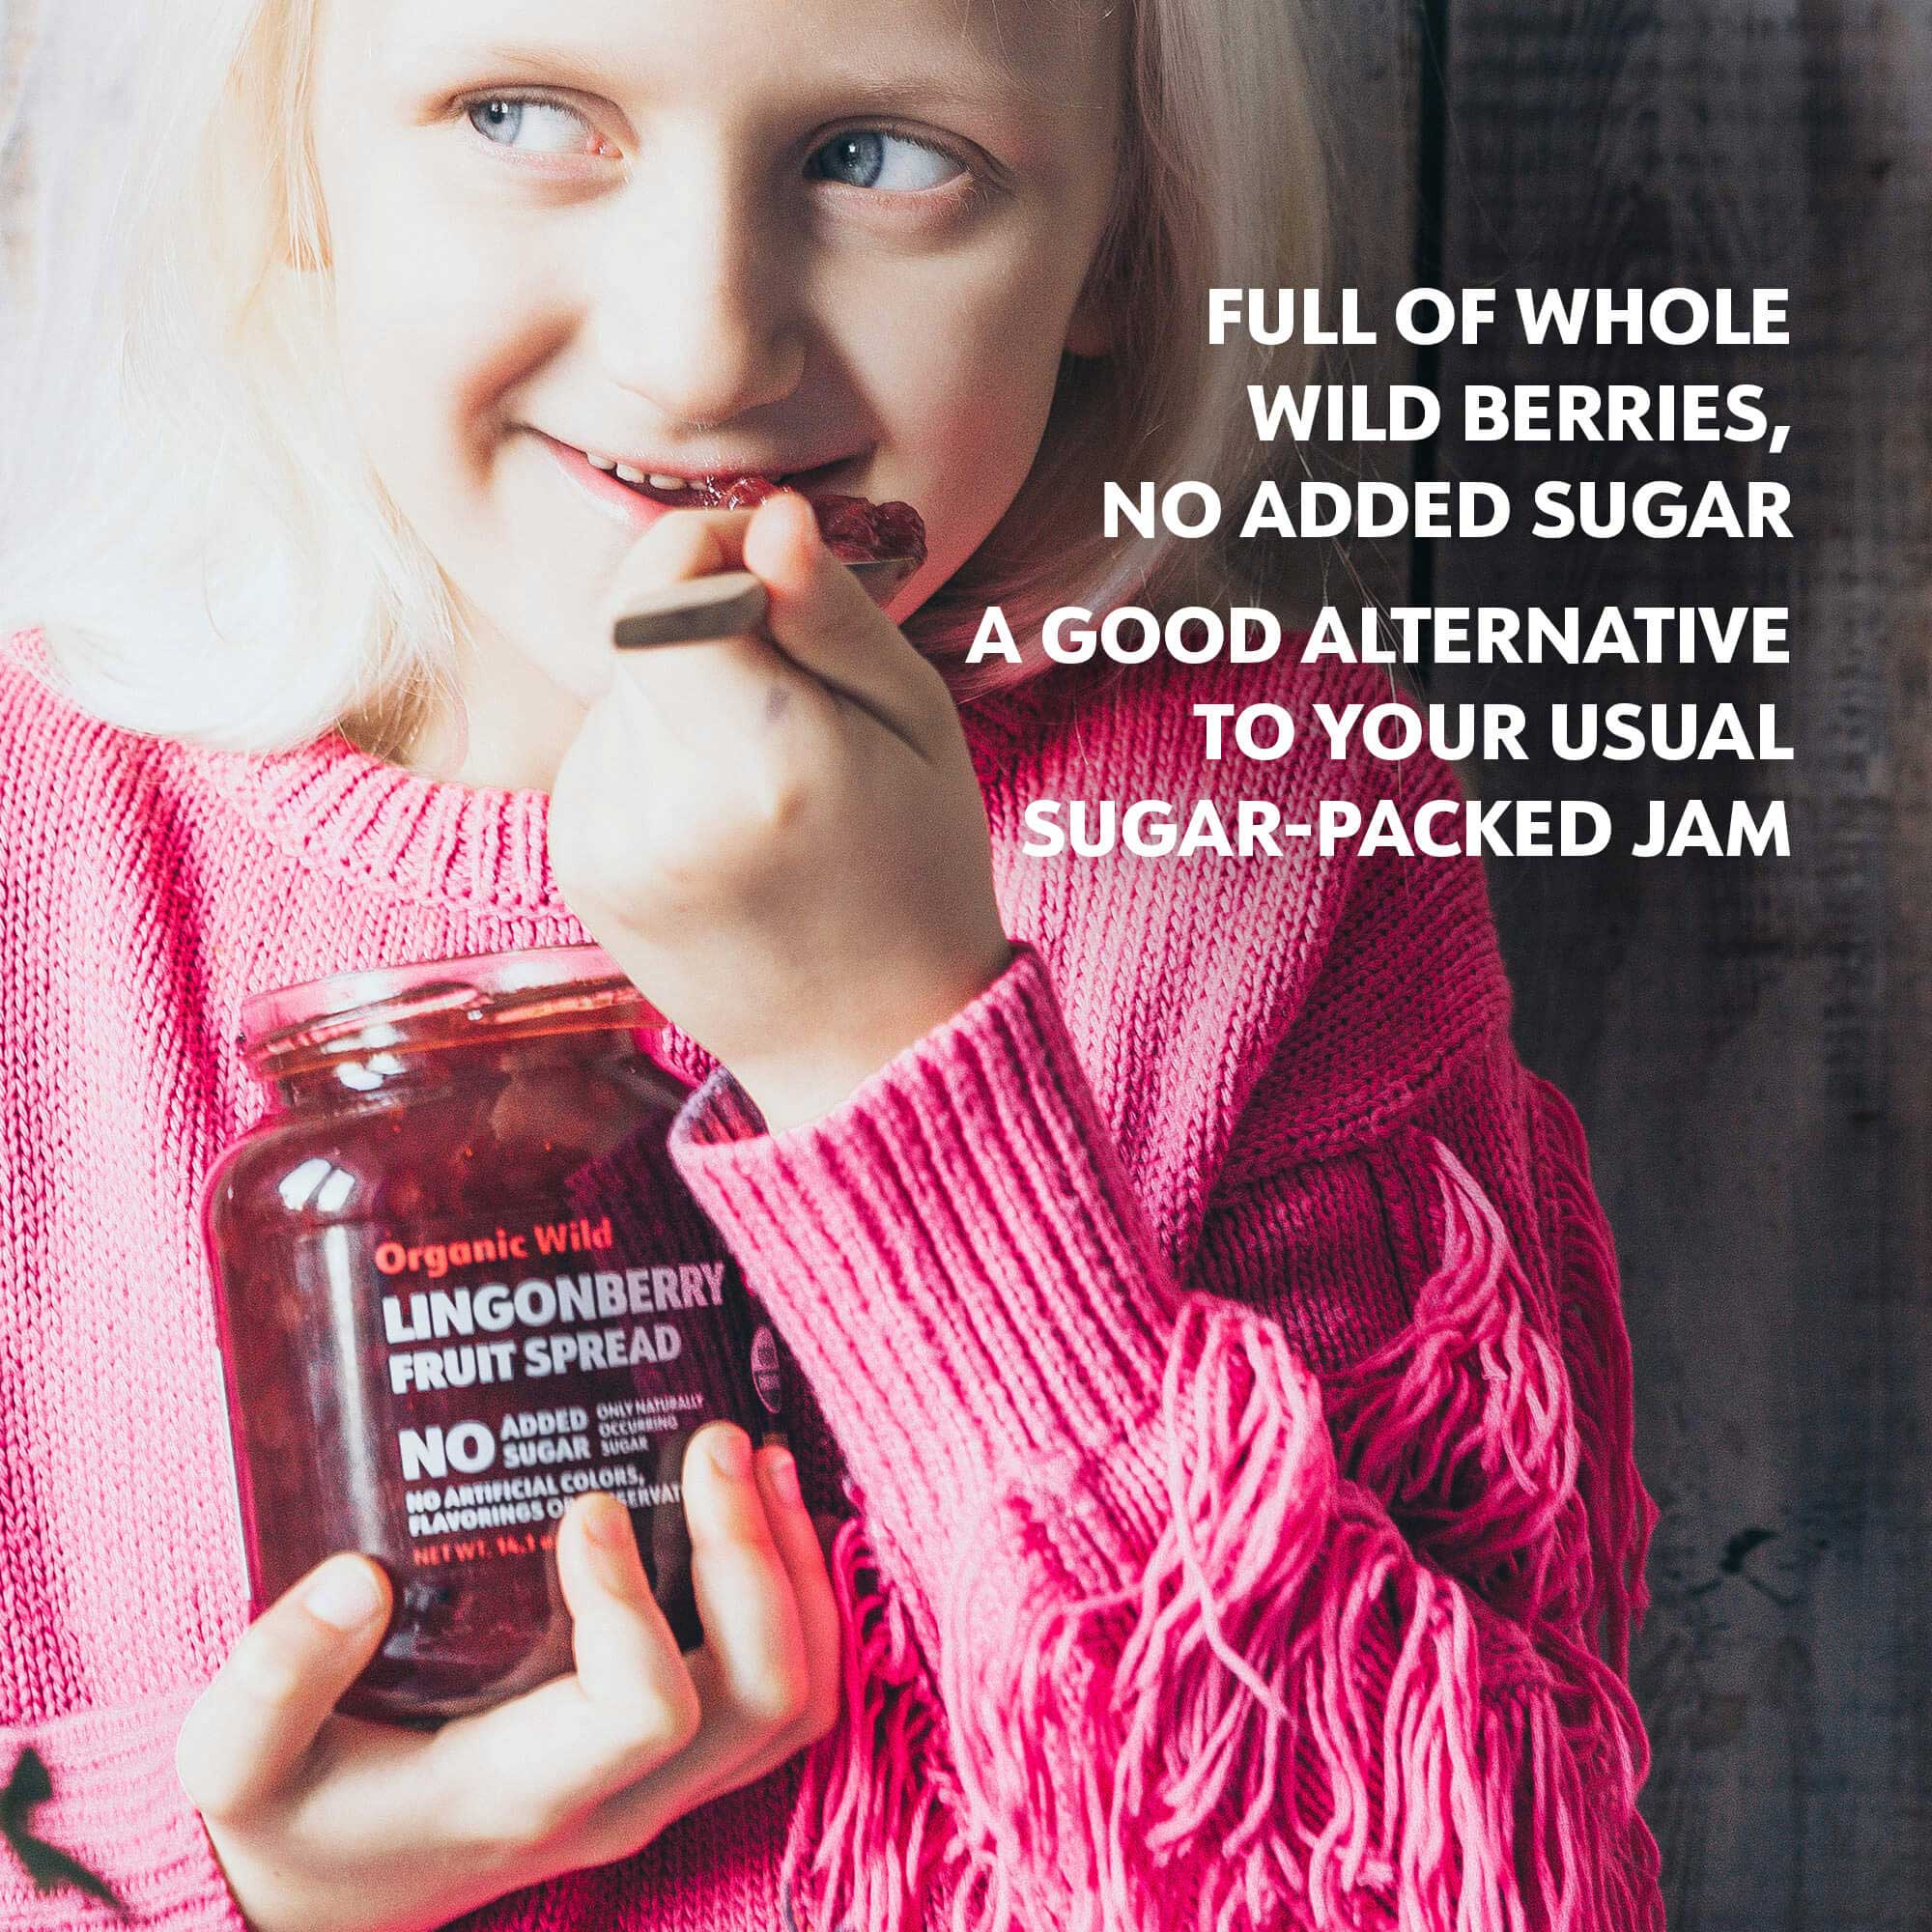 Girl eating from a jar of lingonberry fruit spread